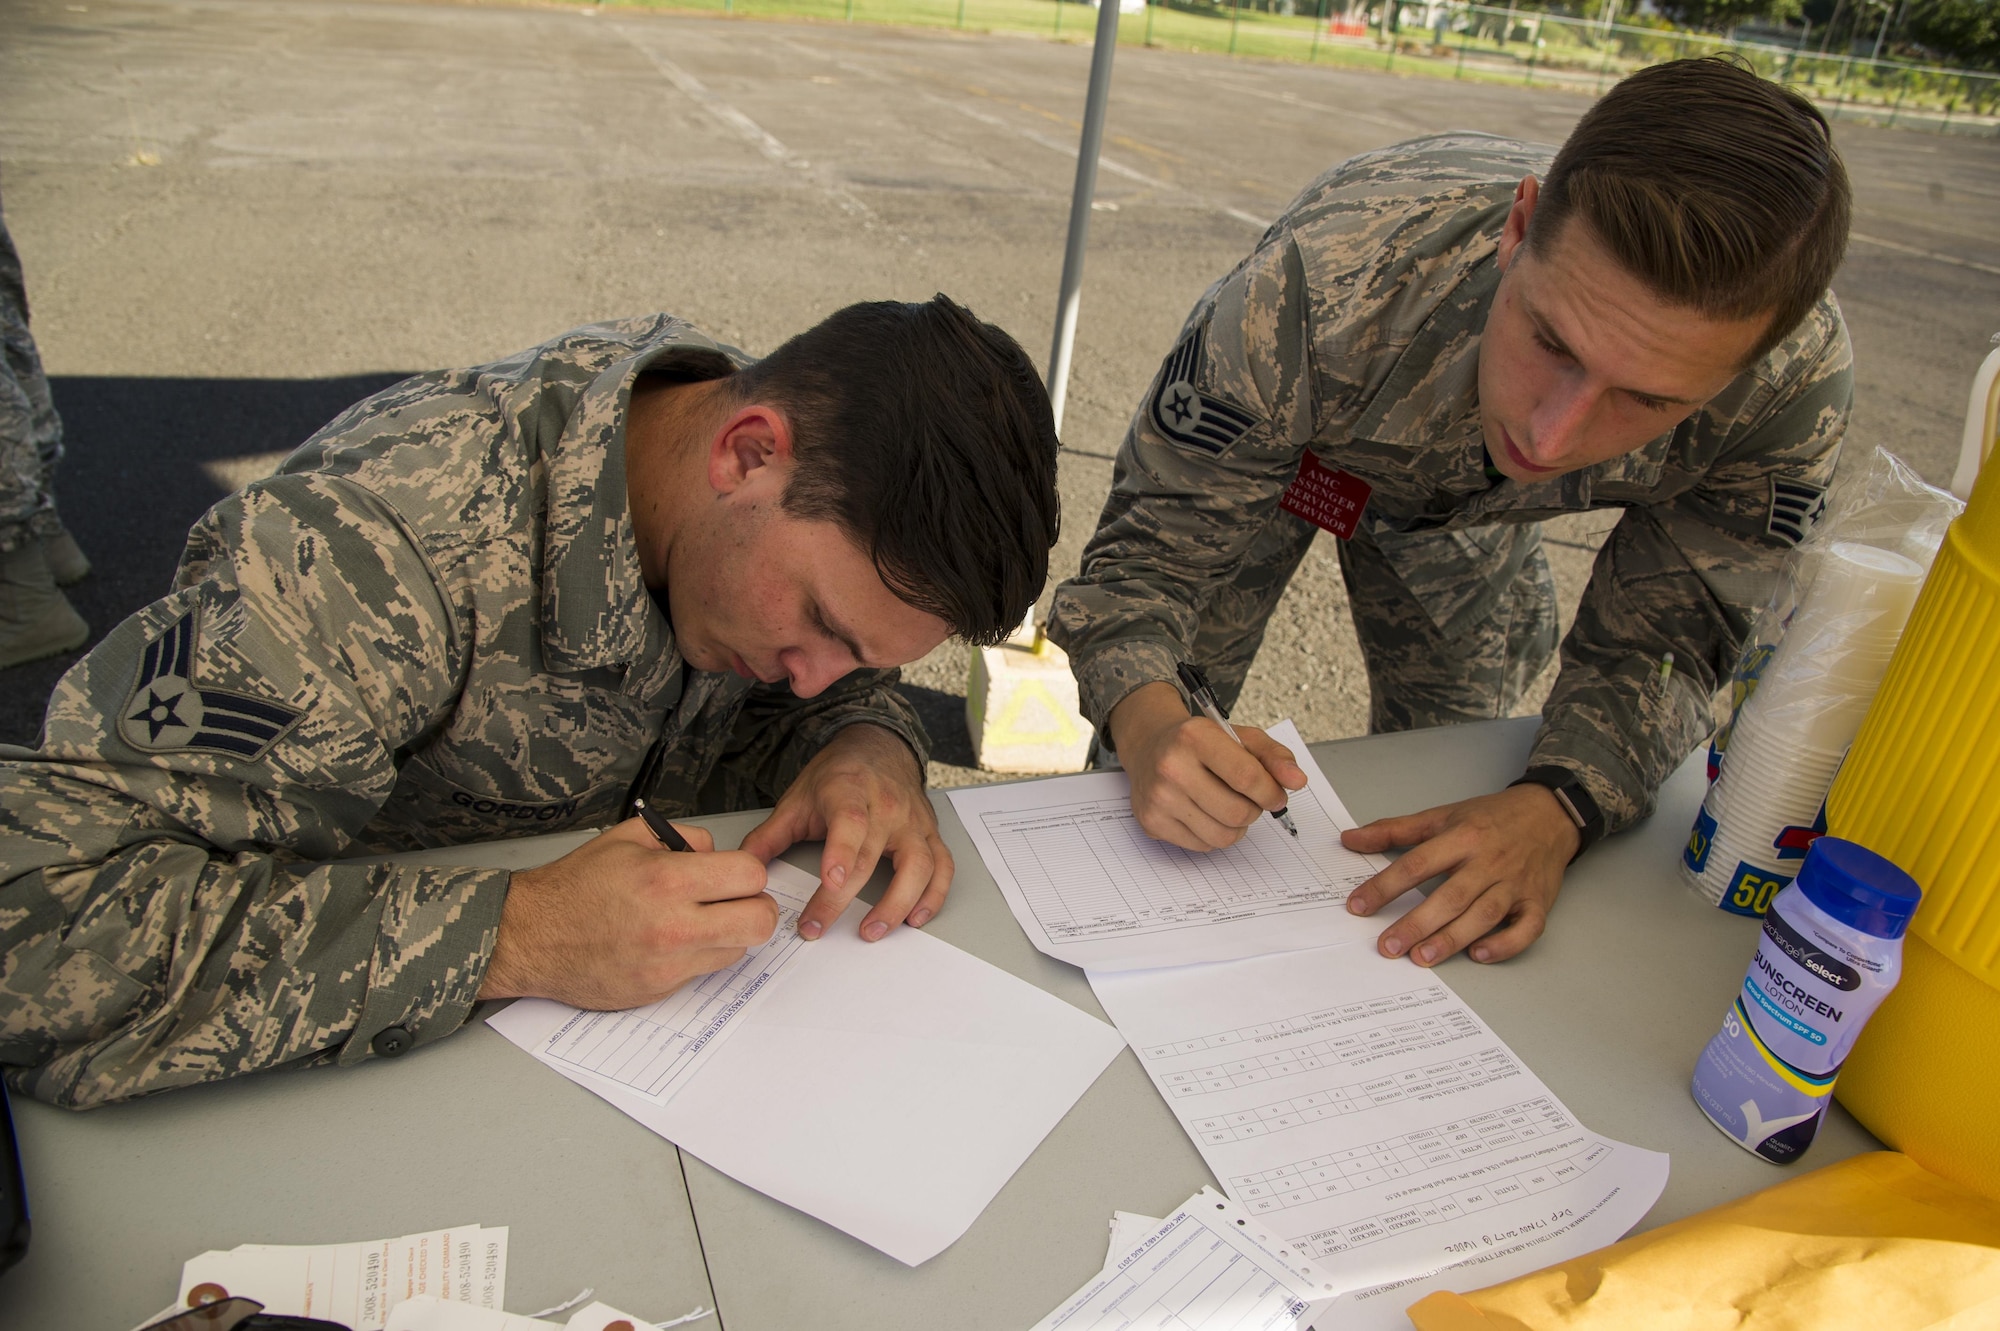 Senior Airman Chad Gordon and Staff Sgt. Robert Goody, 735th Air Mobility Squadron passenger terminal agents, fill out passenger manifests for the passenger and equipment loading competition during the Hickam Port Dawg Challenge, at Joint Base Pearl Harbor-Hickam, Hawaii, Nov. 17, 2017. The aerial port community hosts a Port Dawg Challenge every year to promote professionalism, and demonstrate air and space expeditionary force capabilities. (U.S. Air Force photo by Tech. Sgt. Heather Redman)